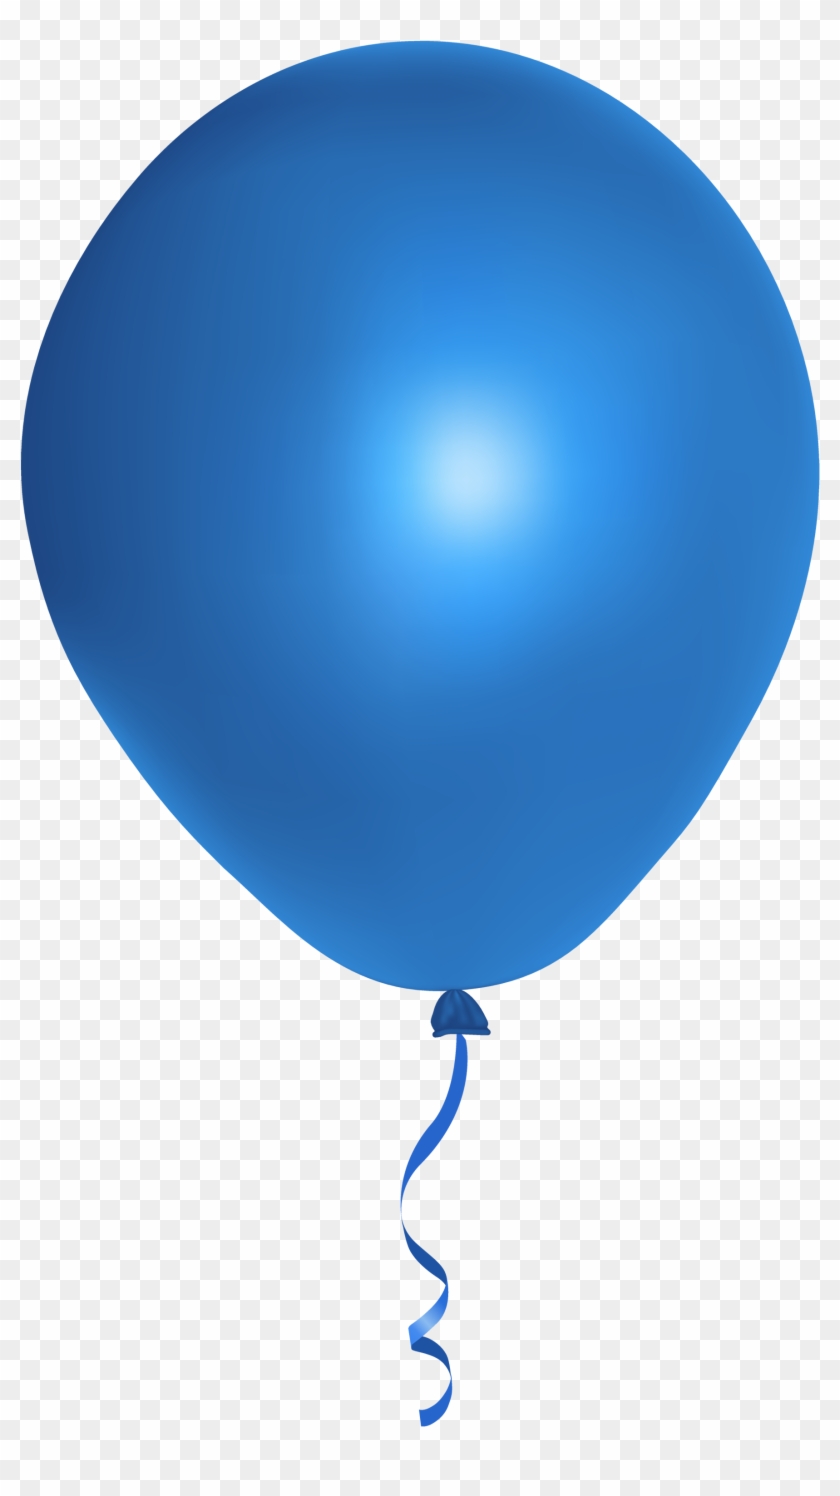 20 Transparent Background Pink And Blue Balloons Png